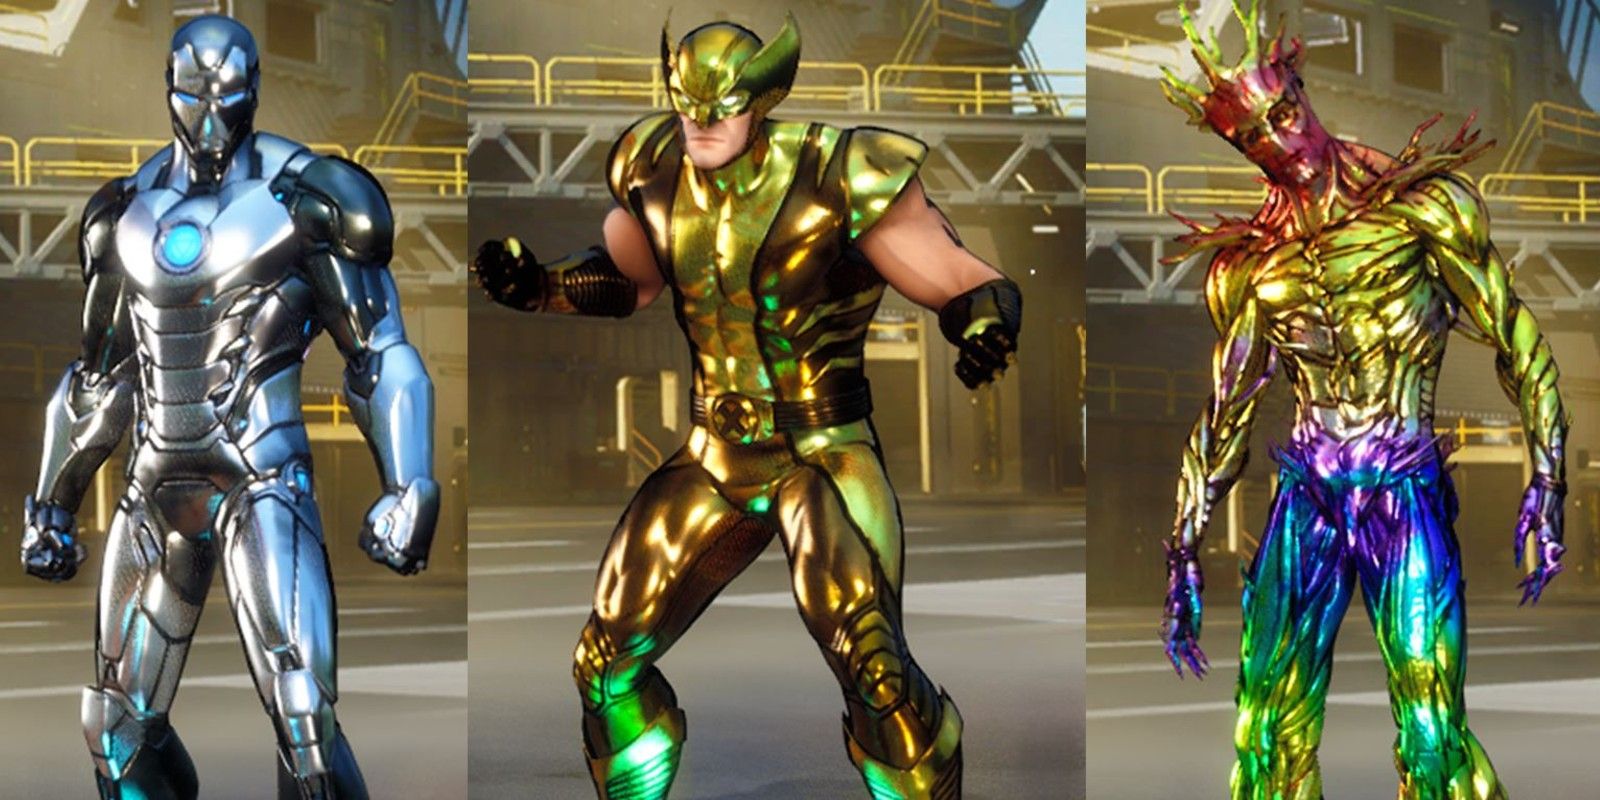 How To Unlock The Silver Gold & Holo Superhero Skins in Fortnite